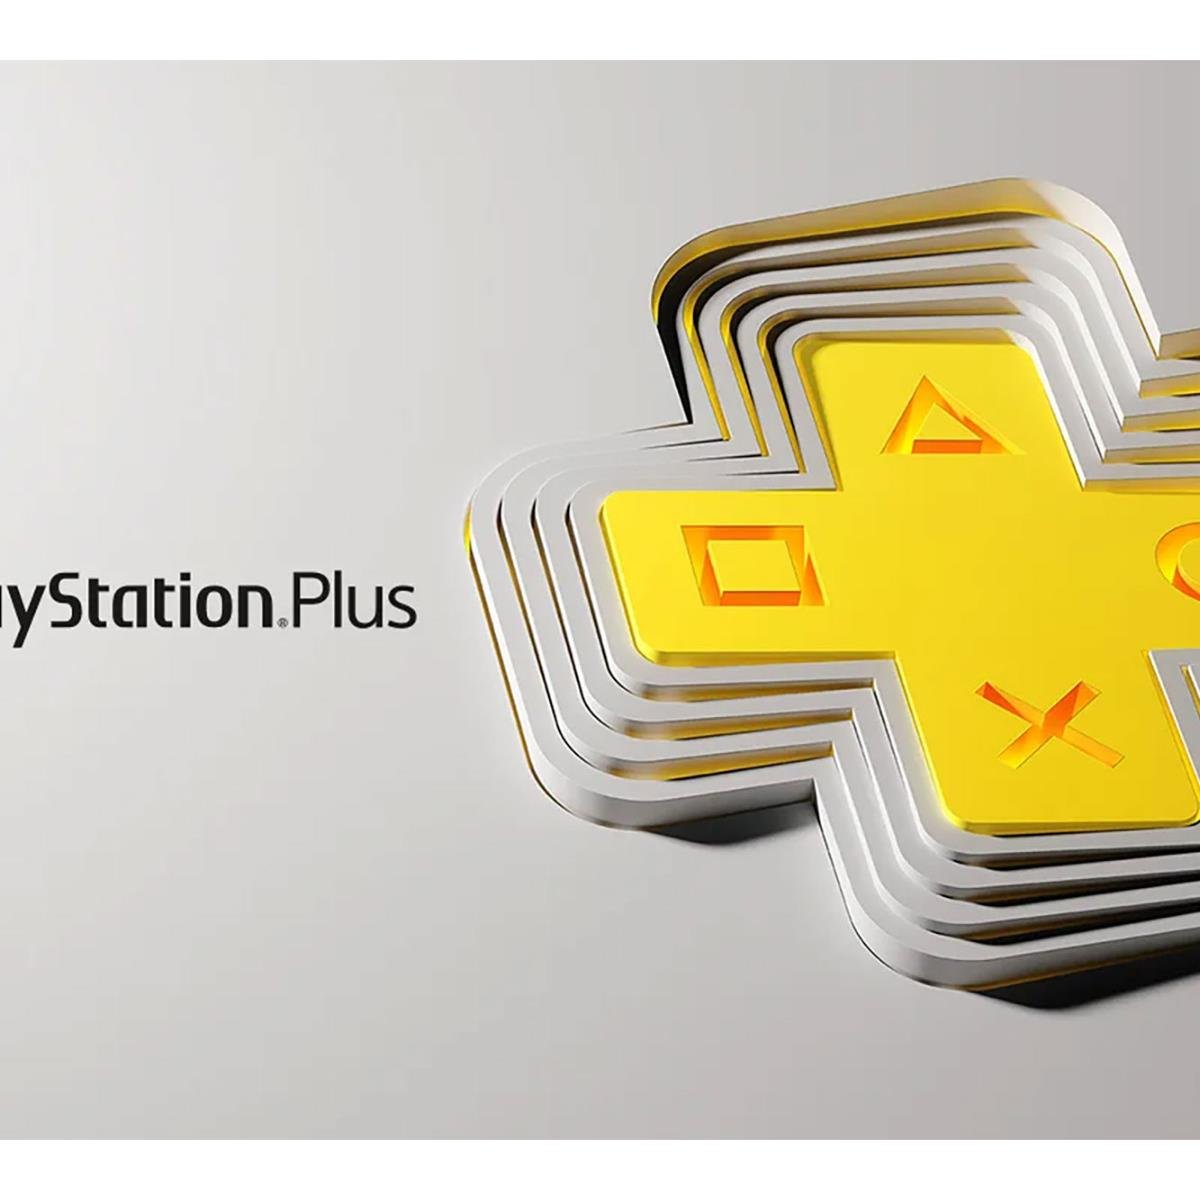 PlayStation Plus 12-month sub price to increase by 33%